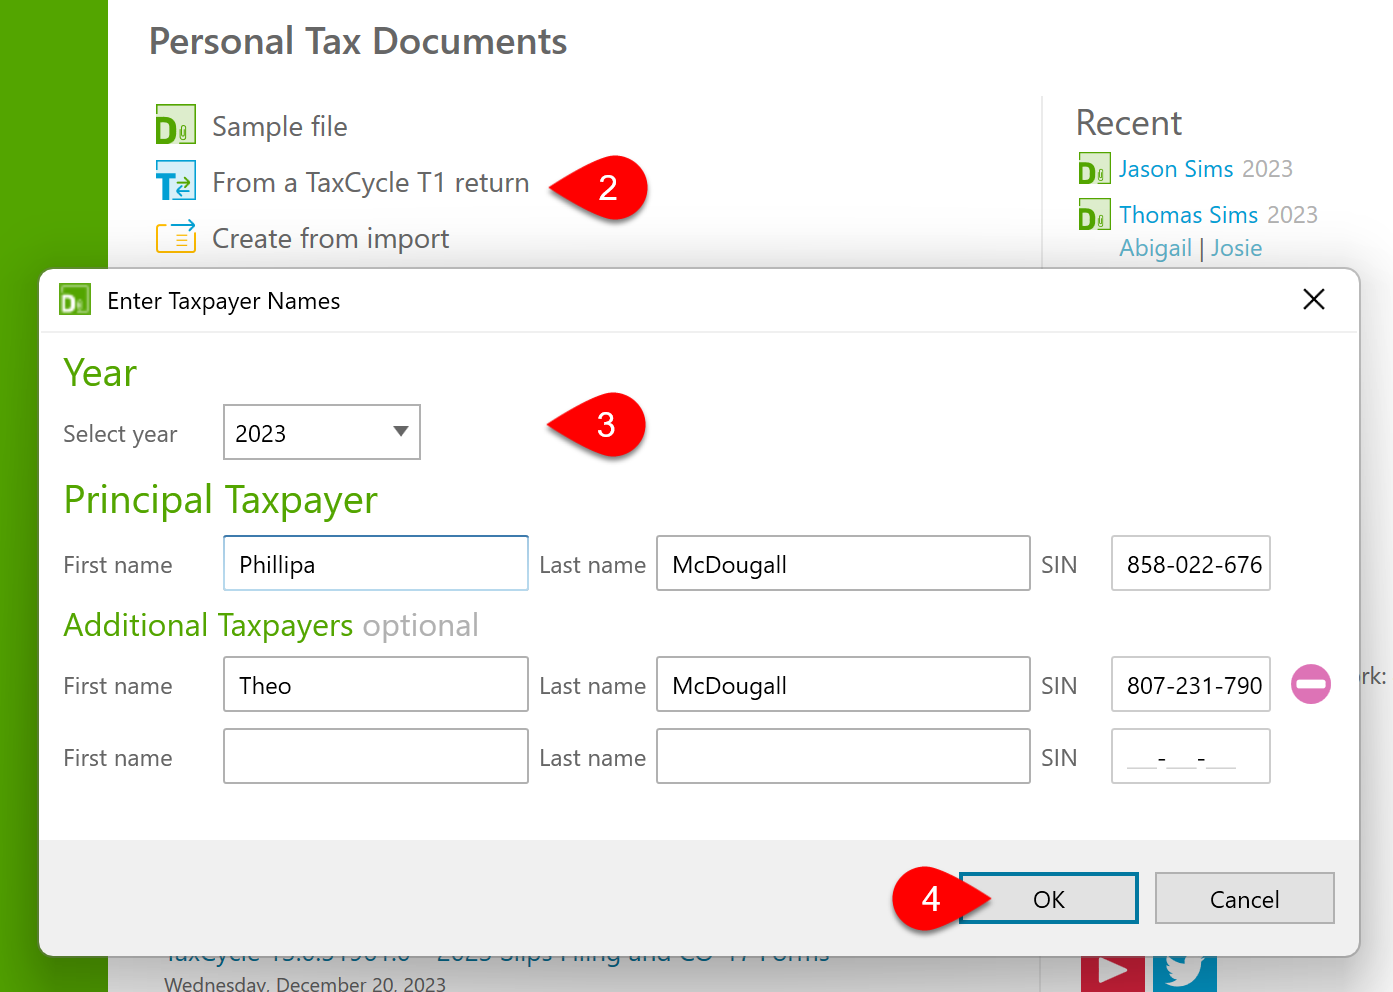 Screen Capture: From a TaxCycle T1 return